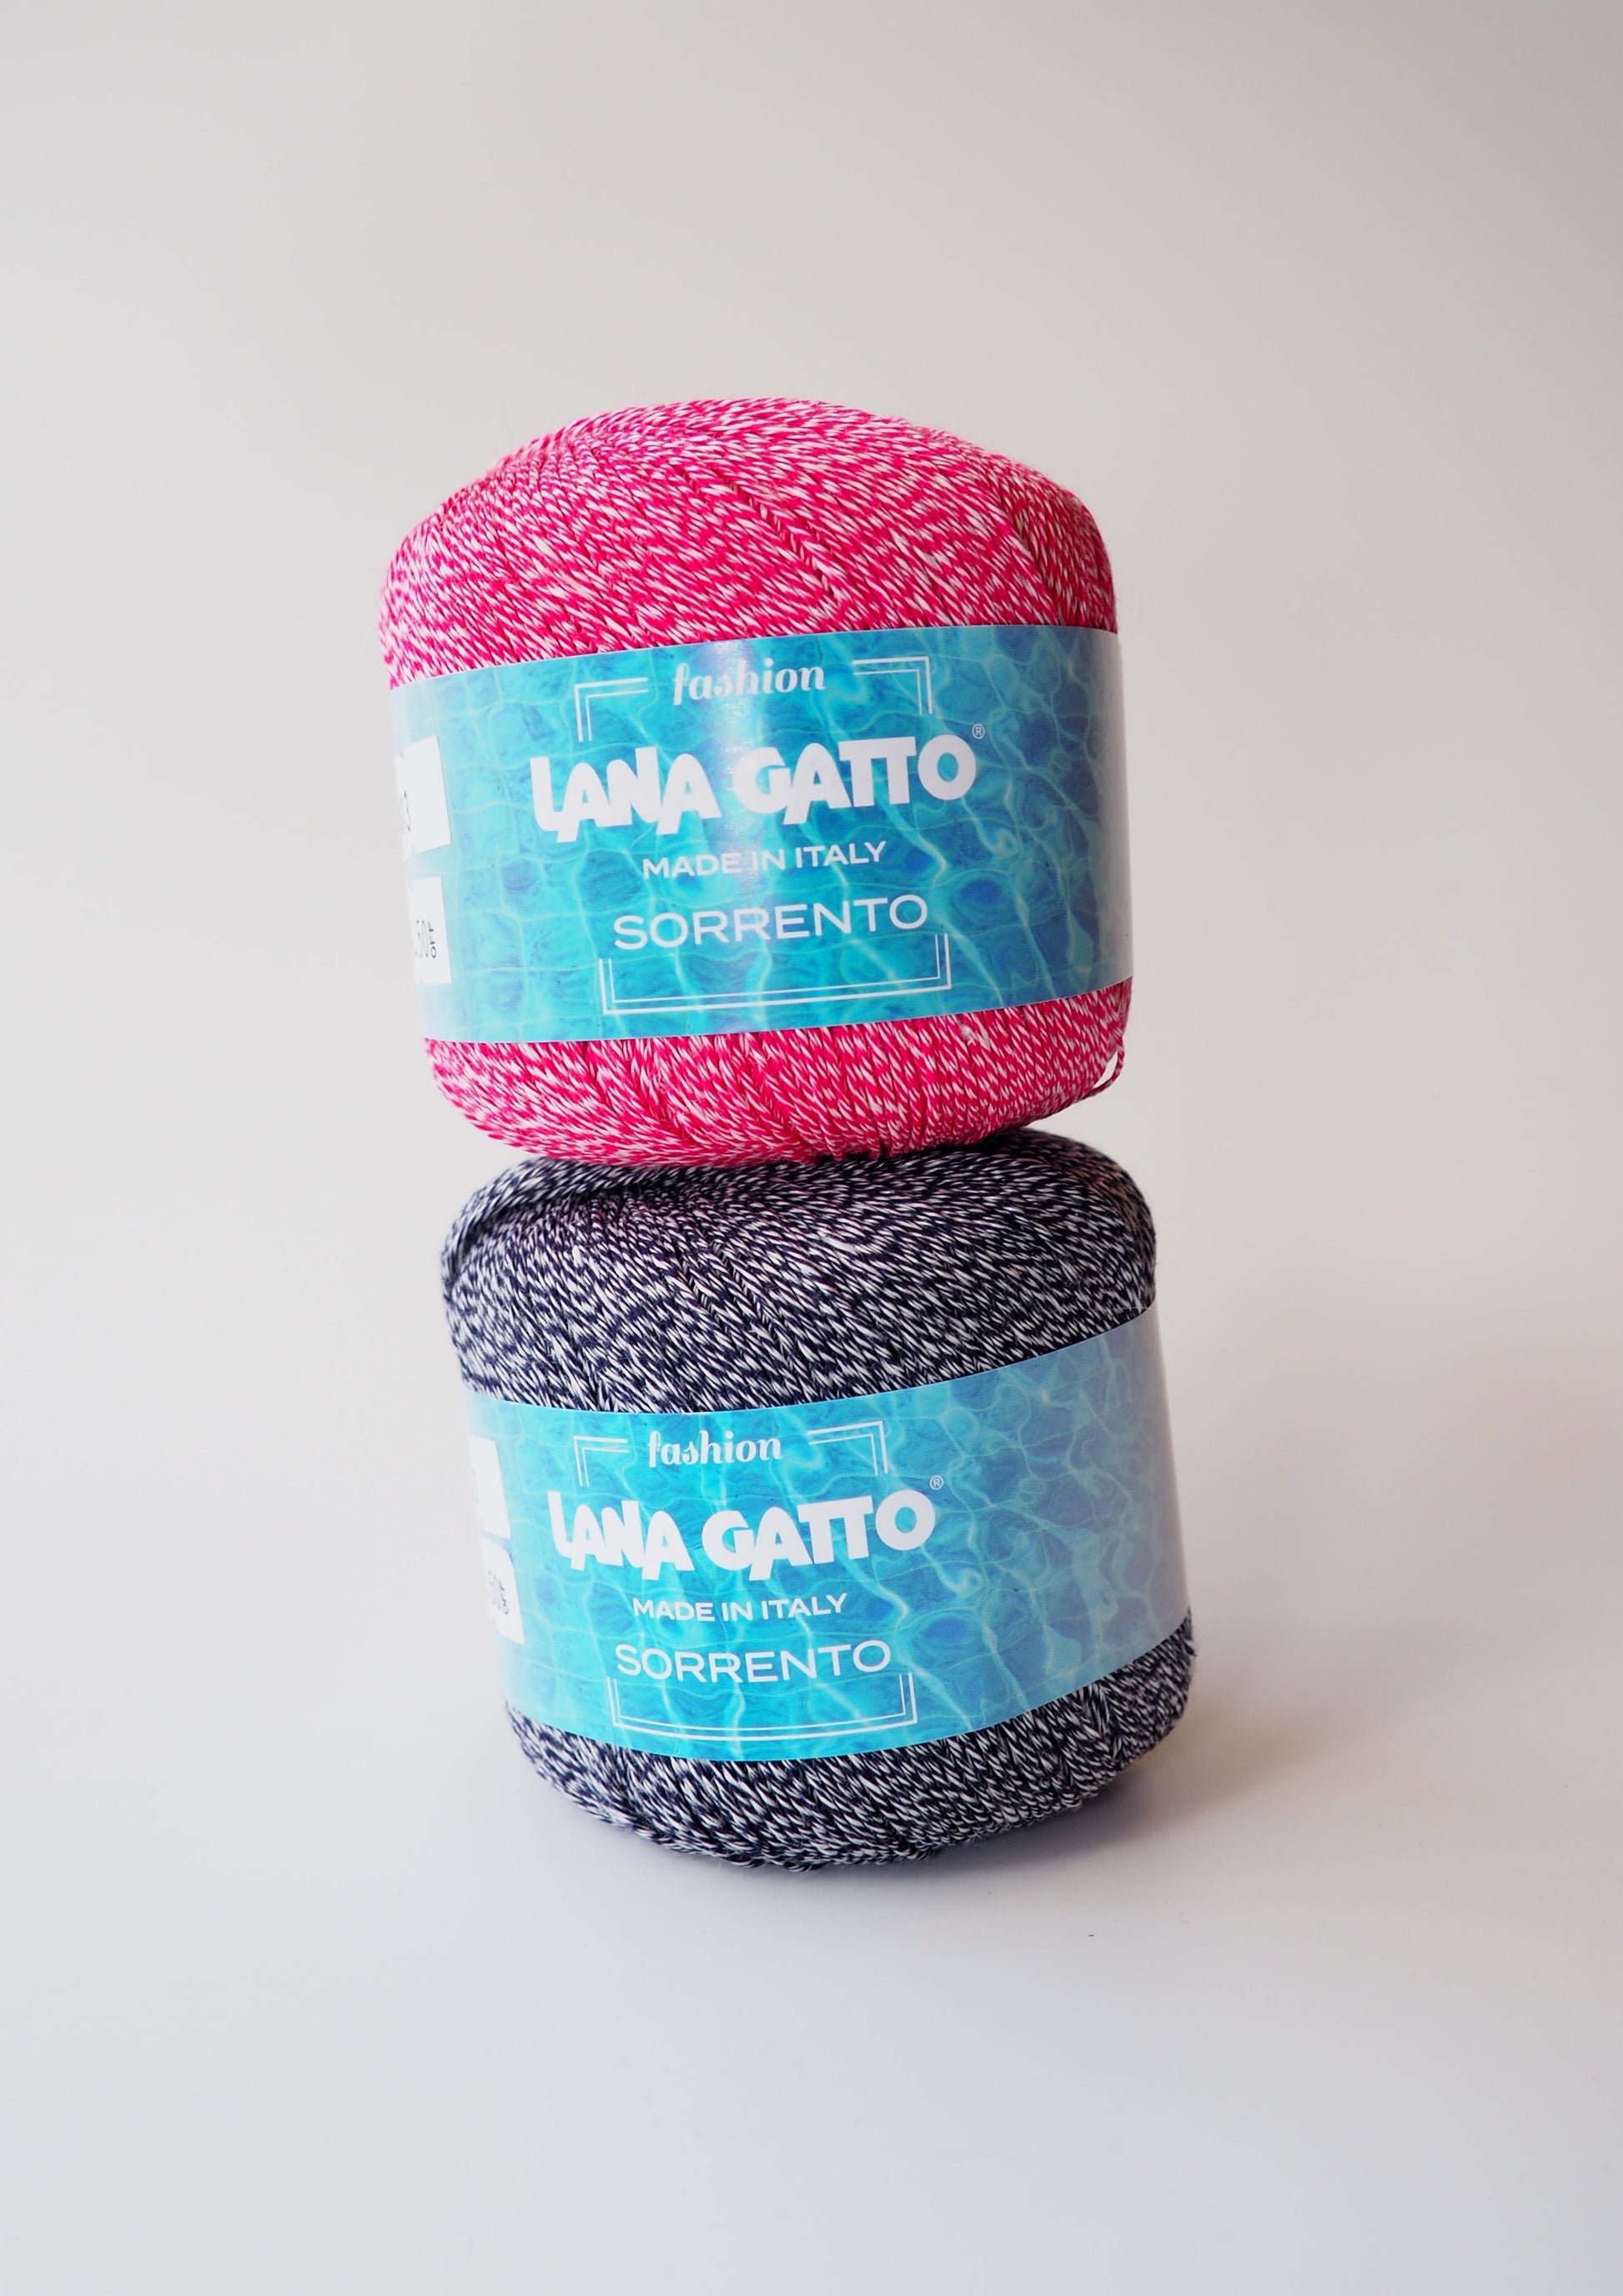 Image of Lana Gatto Sorrento yarn: Two balls, one in red color and one in black color, showcasing the beautiful texture and color options.